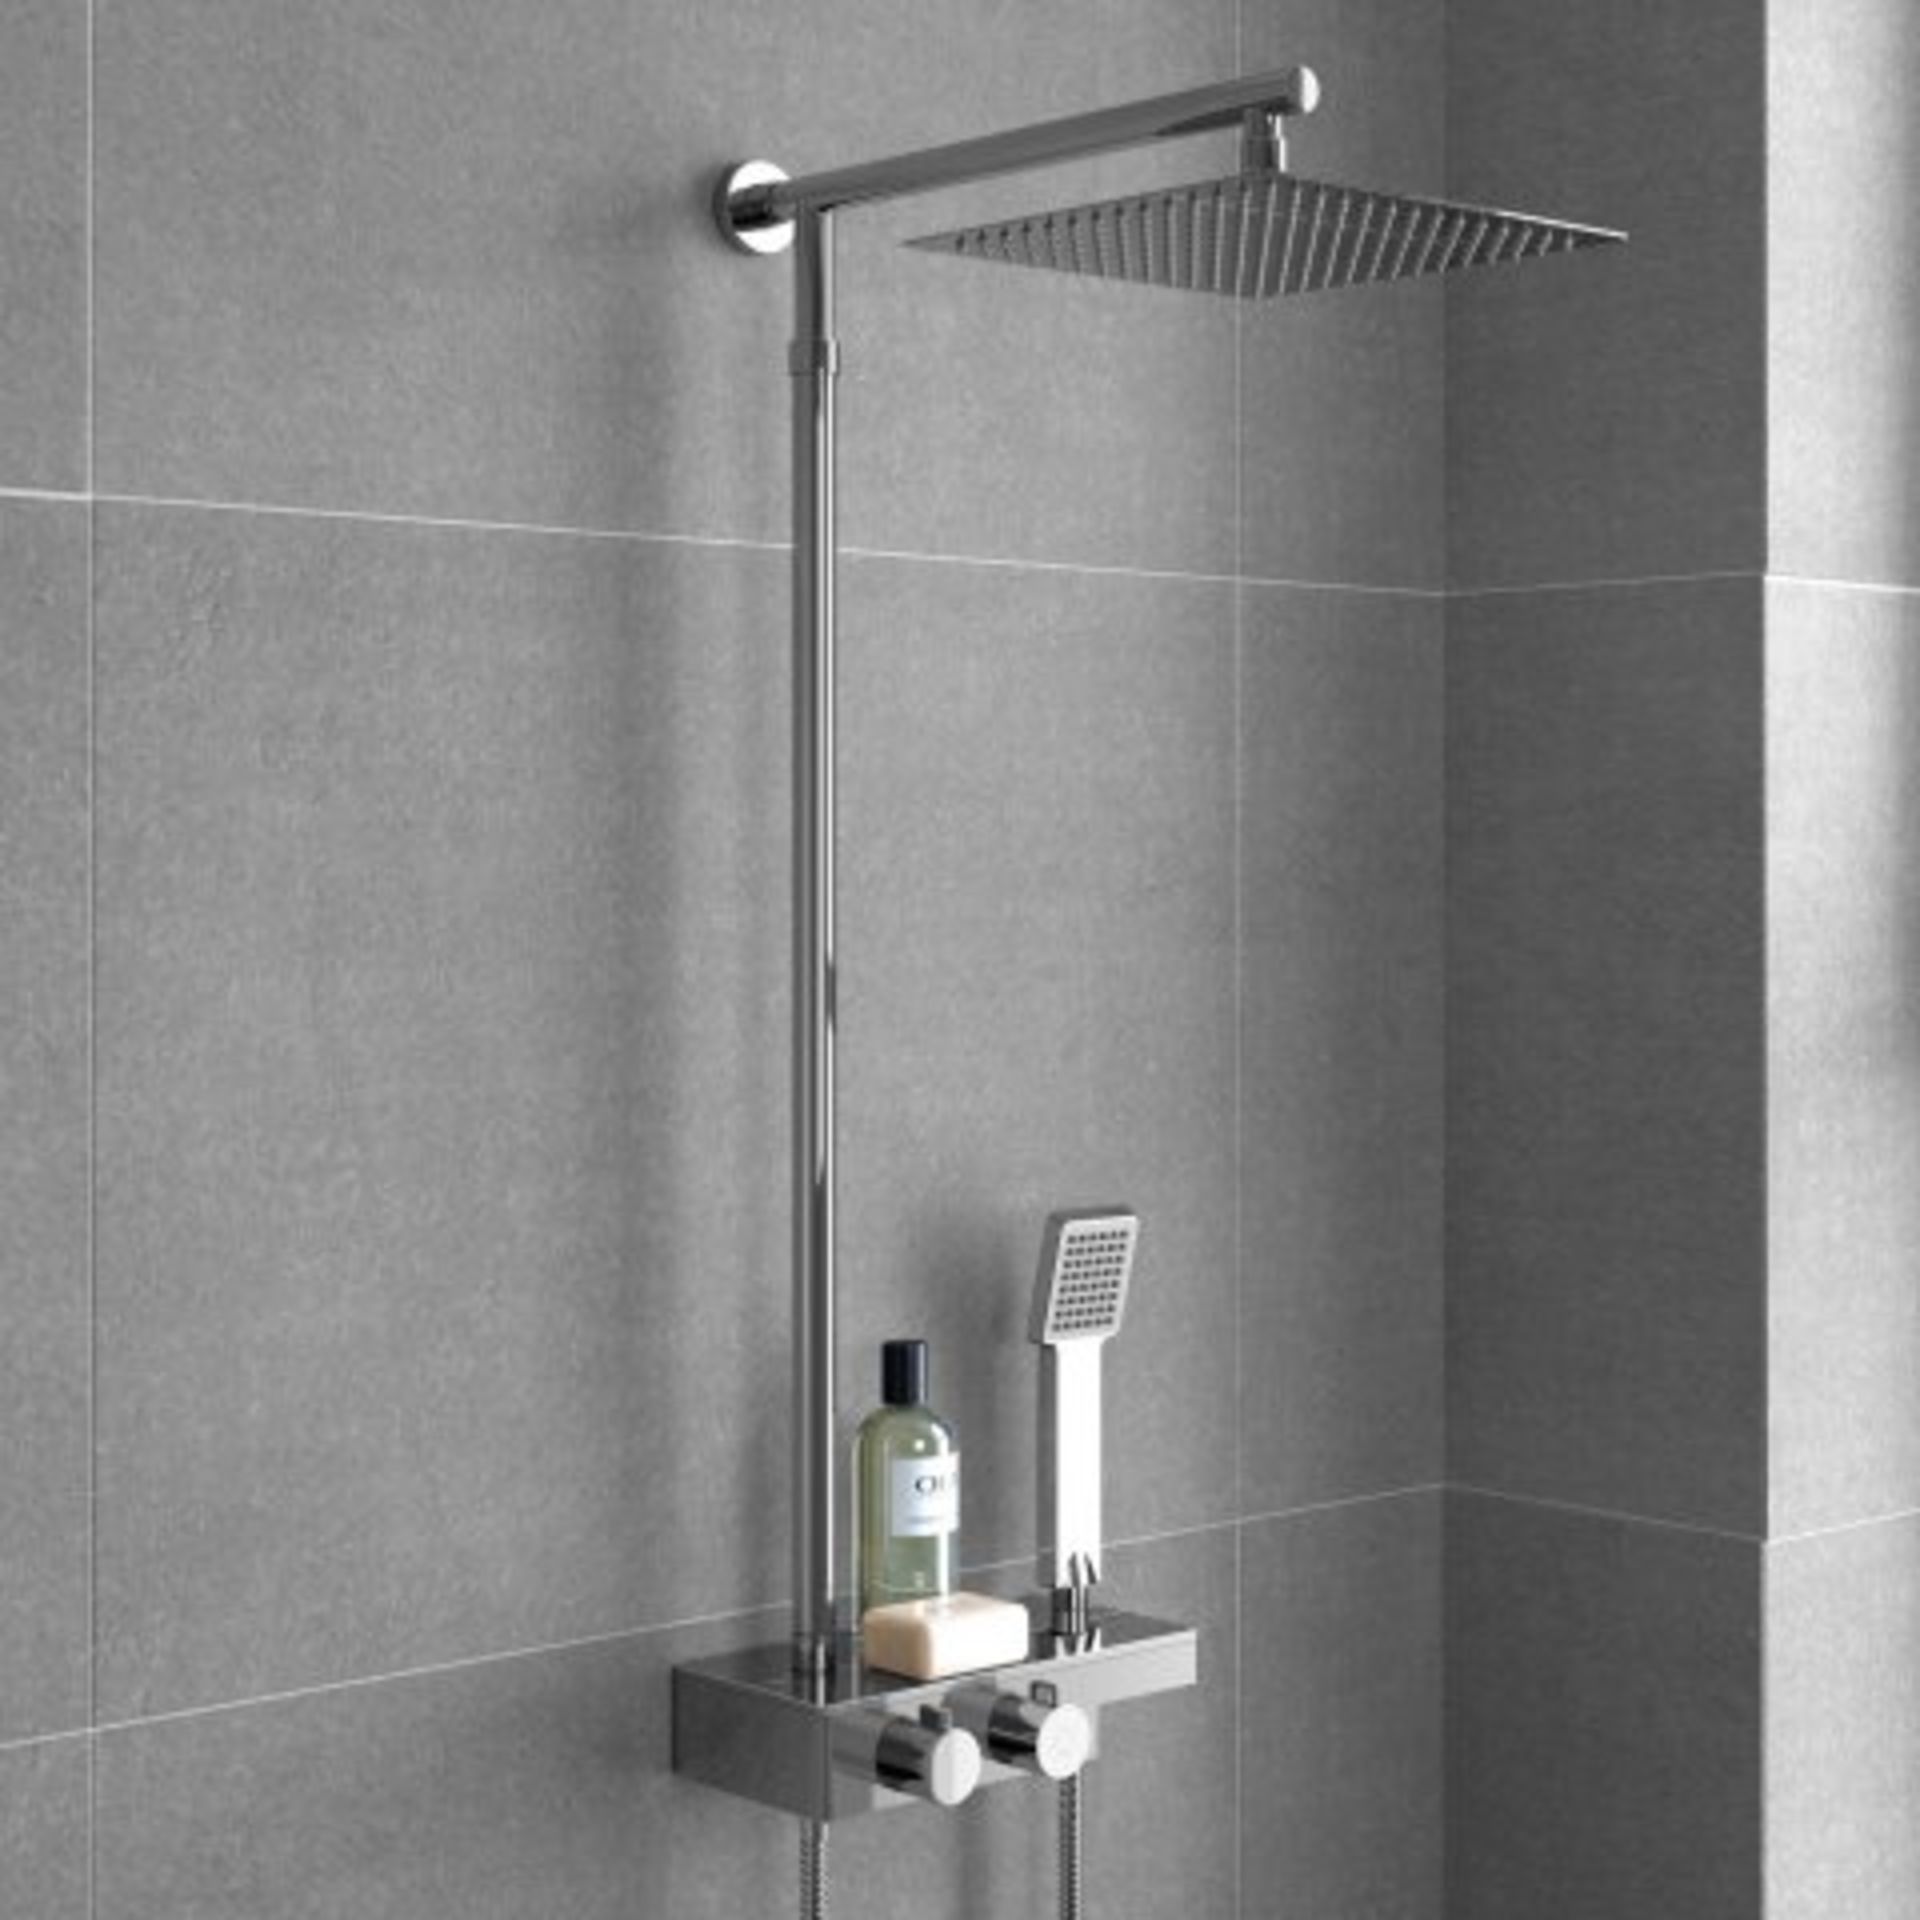 (K160) 250mm Large Square Head Thermostatic Exposed Shower Kit, Handheld & Storage Shelf. RRP £349. - Image 2 of 5